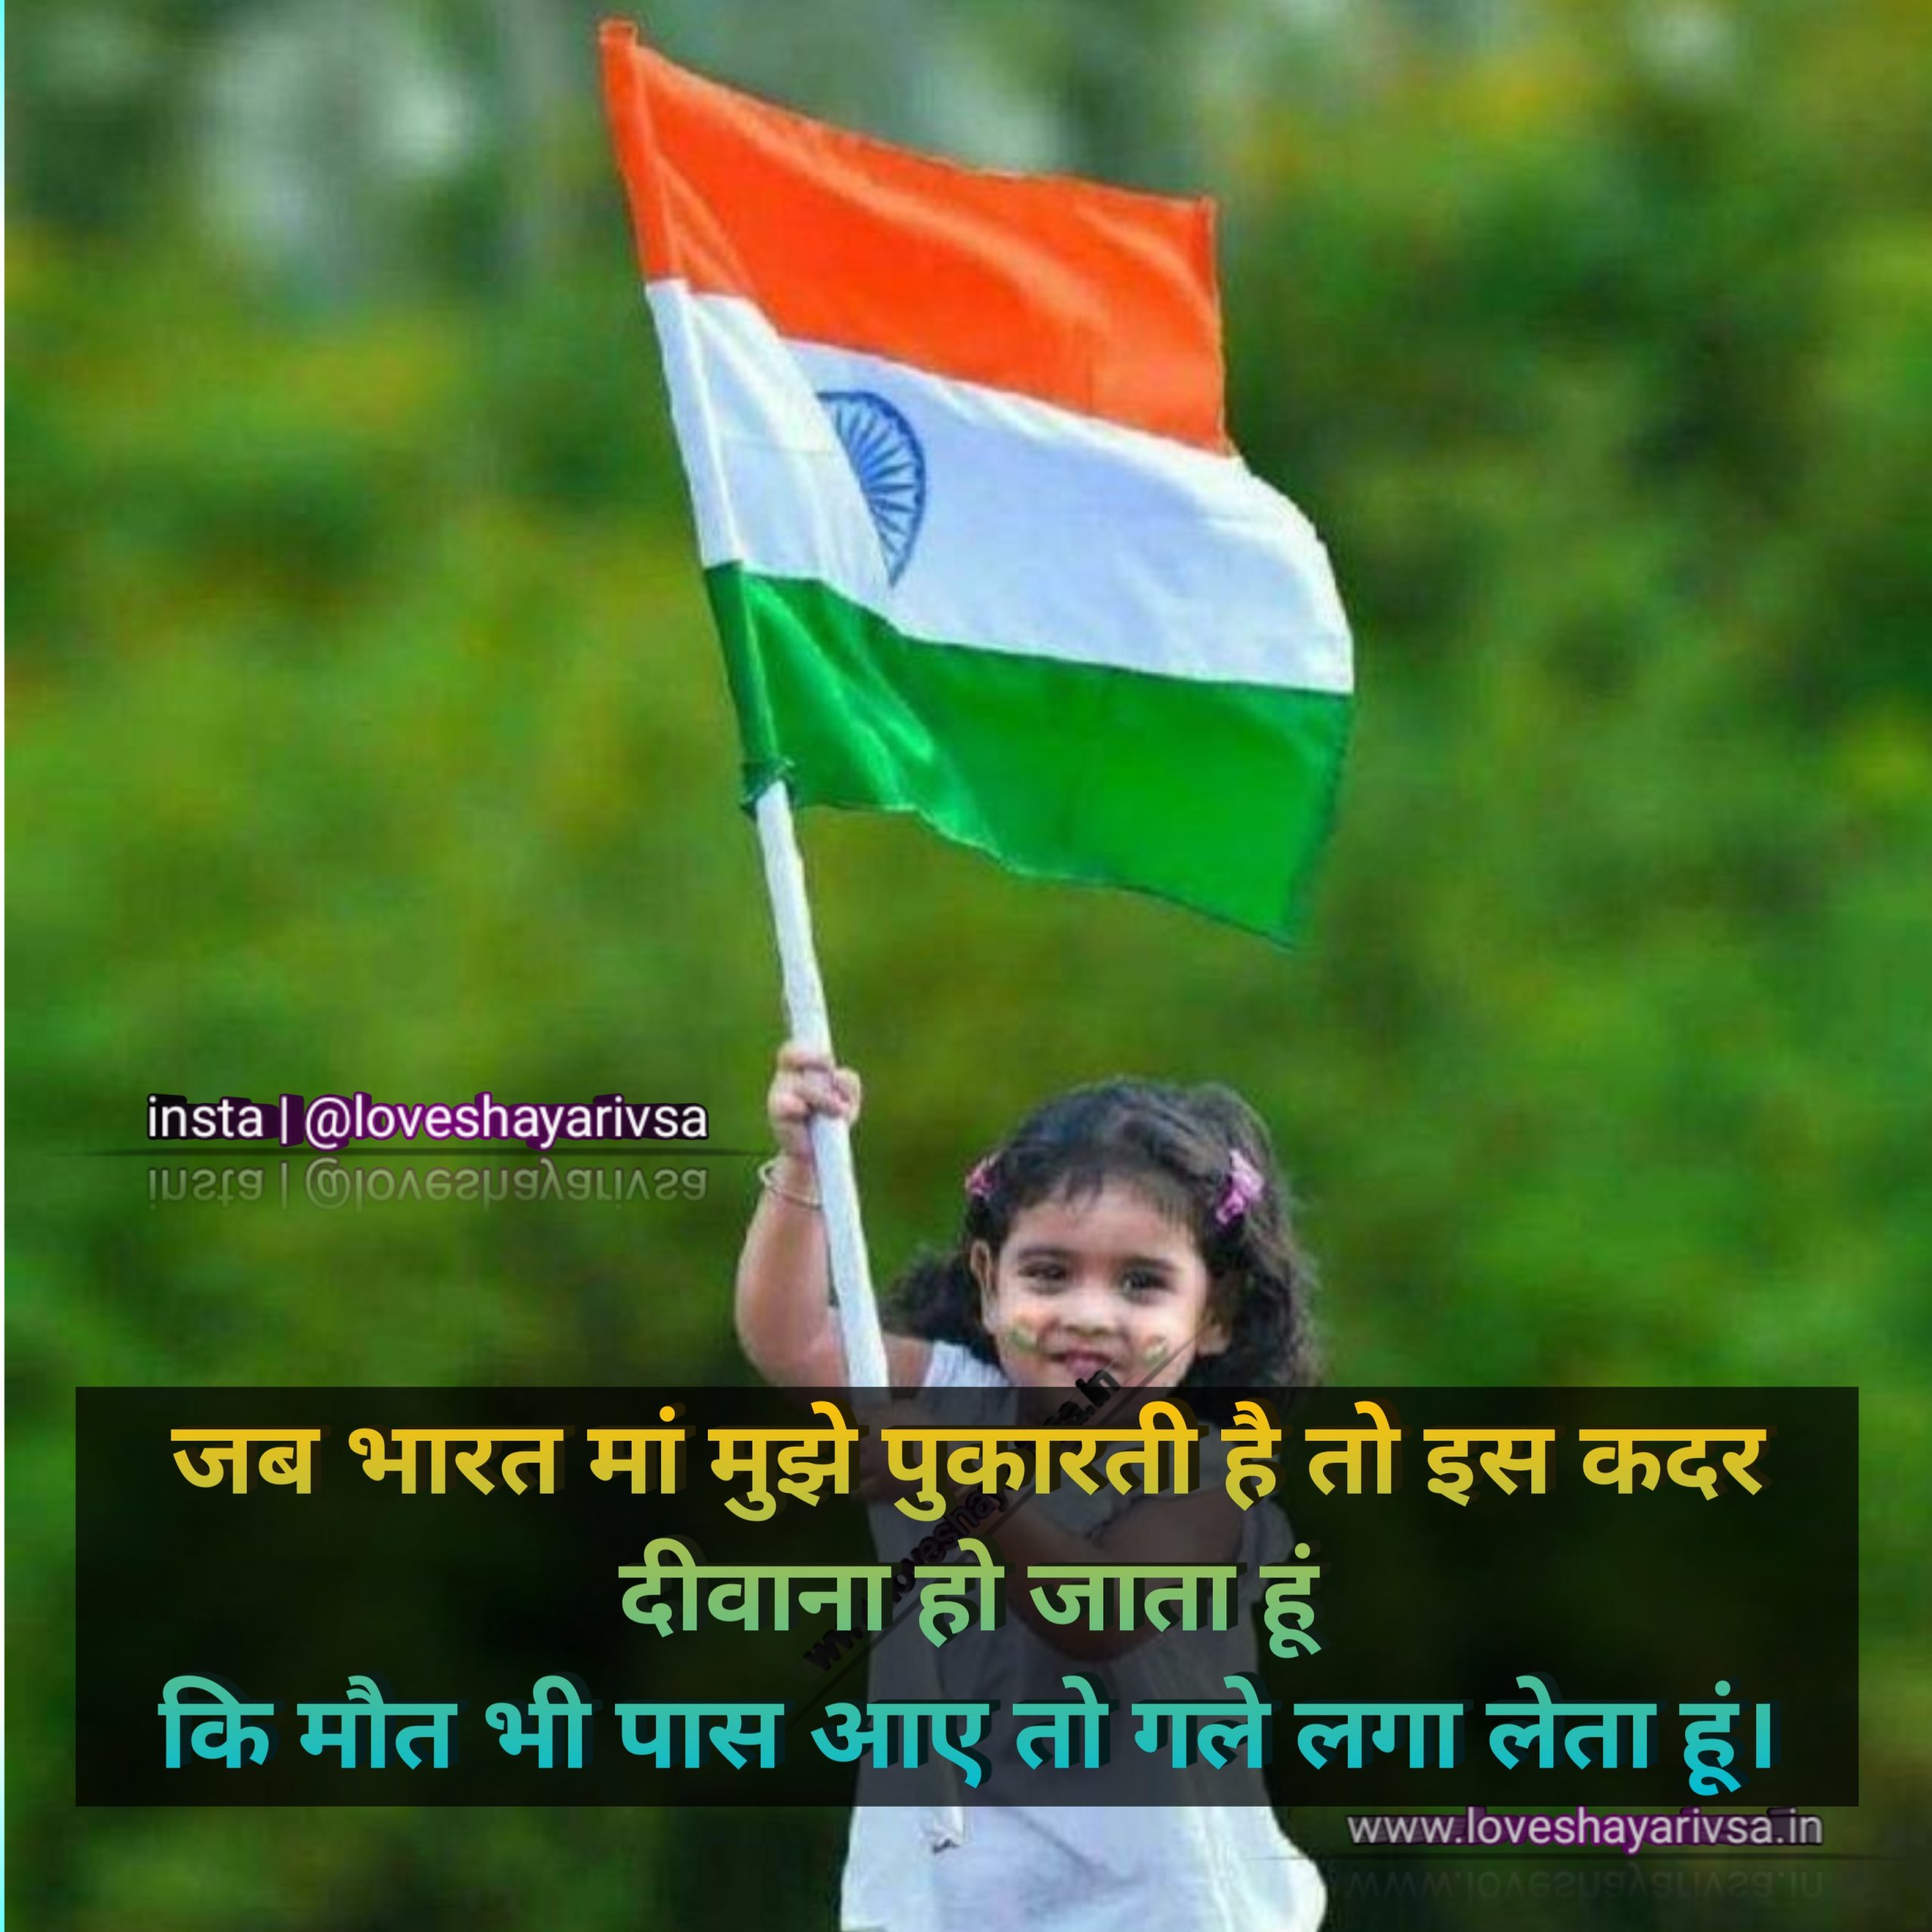 "A Young girl Wrapped in the Tricolor, Standing Tall as a Symbol of India's Bright Future and Aspirations on Independence Day ЁЯЗоЁЯЗ│тЬи #PatrioticYouth #FutureLeaders"